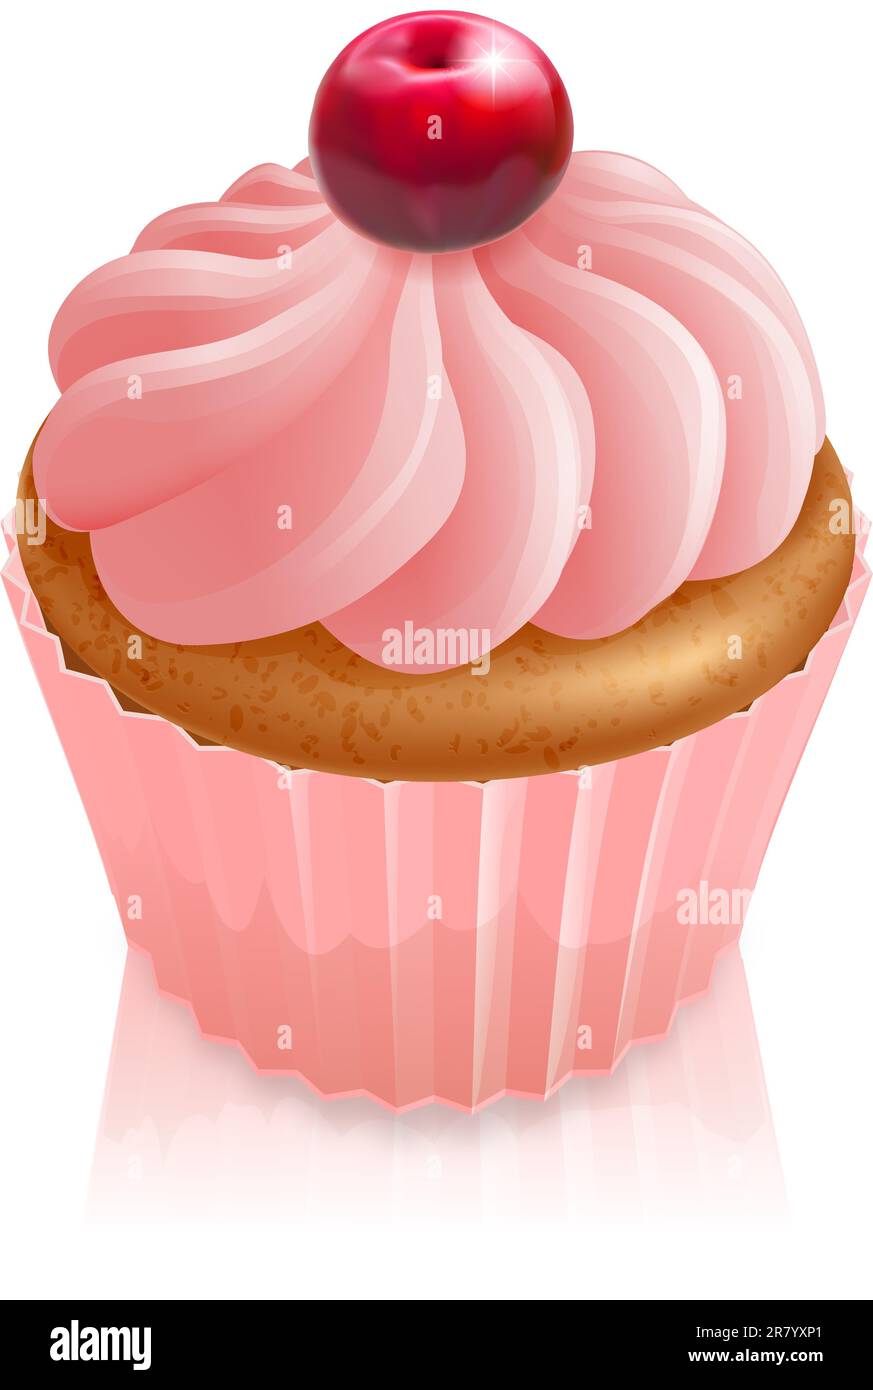 Illustration of a  pink fairy cake cupcake with cherry on top Stock Vector